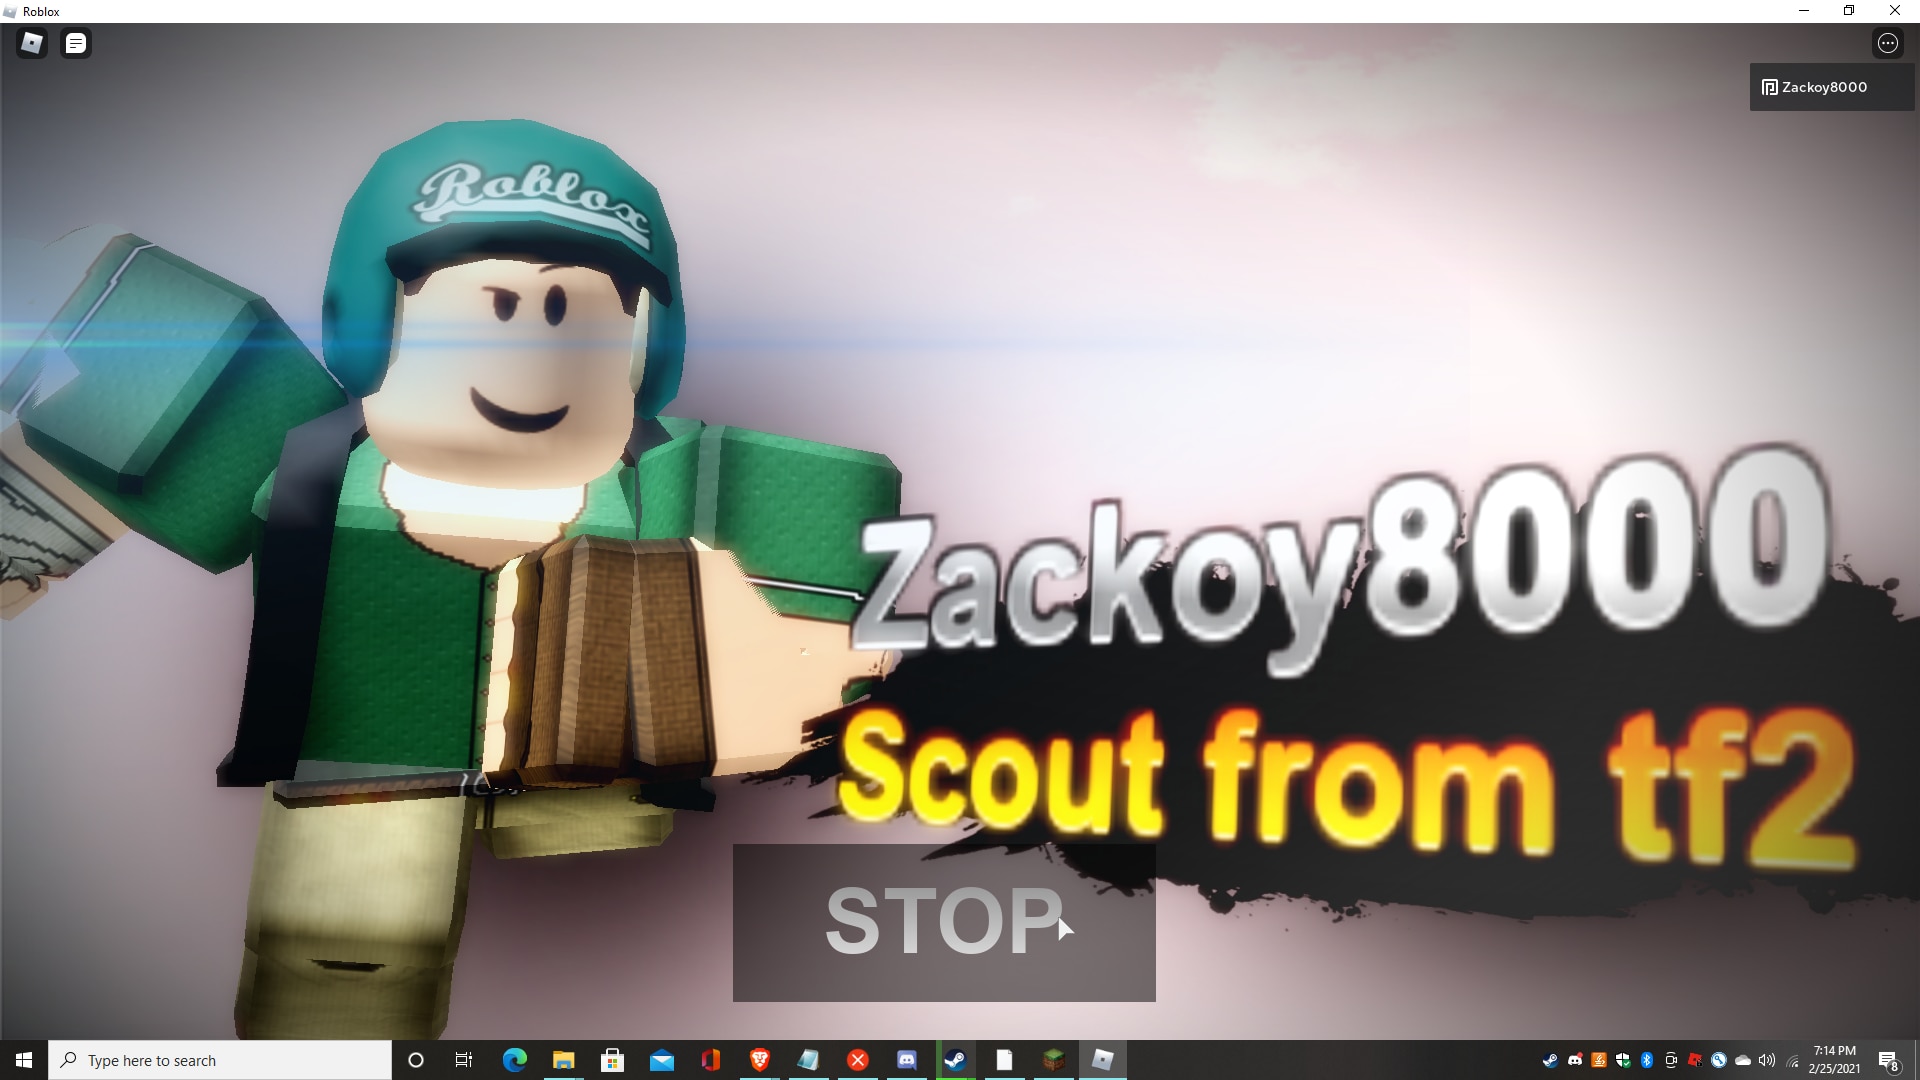 heres a roblox game i play alot its called noobs vs zombies realish